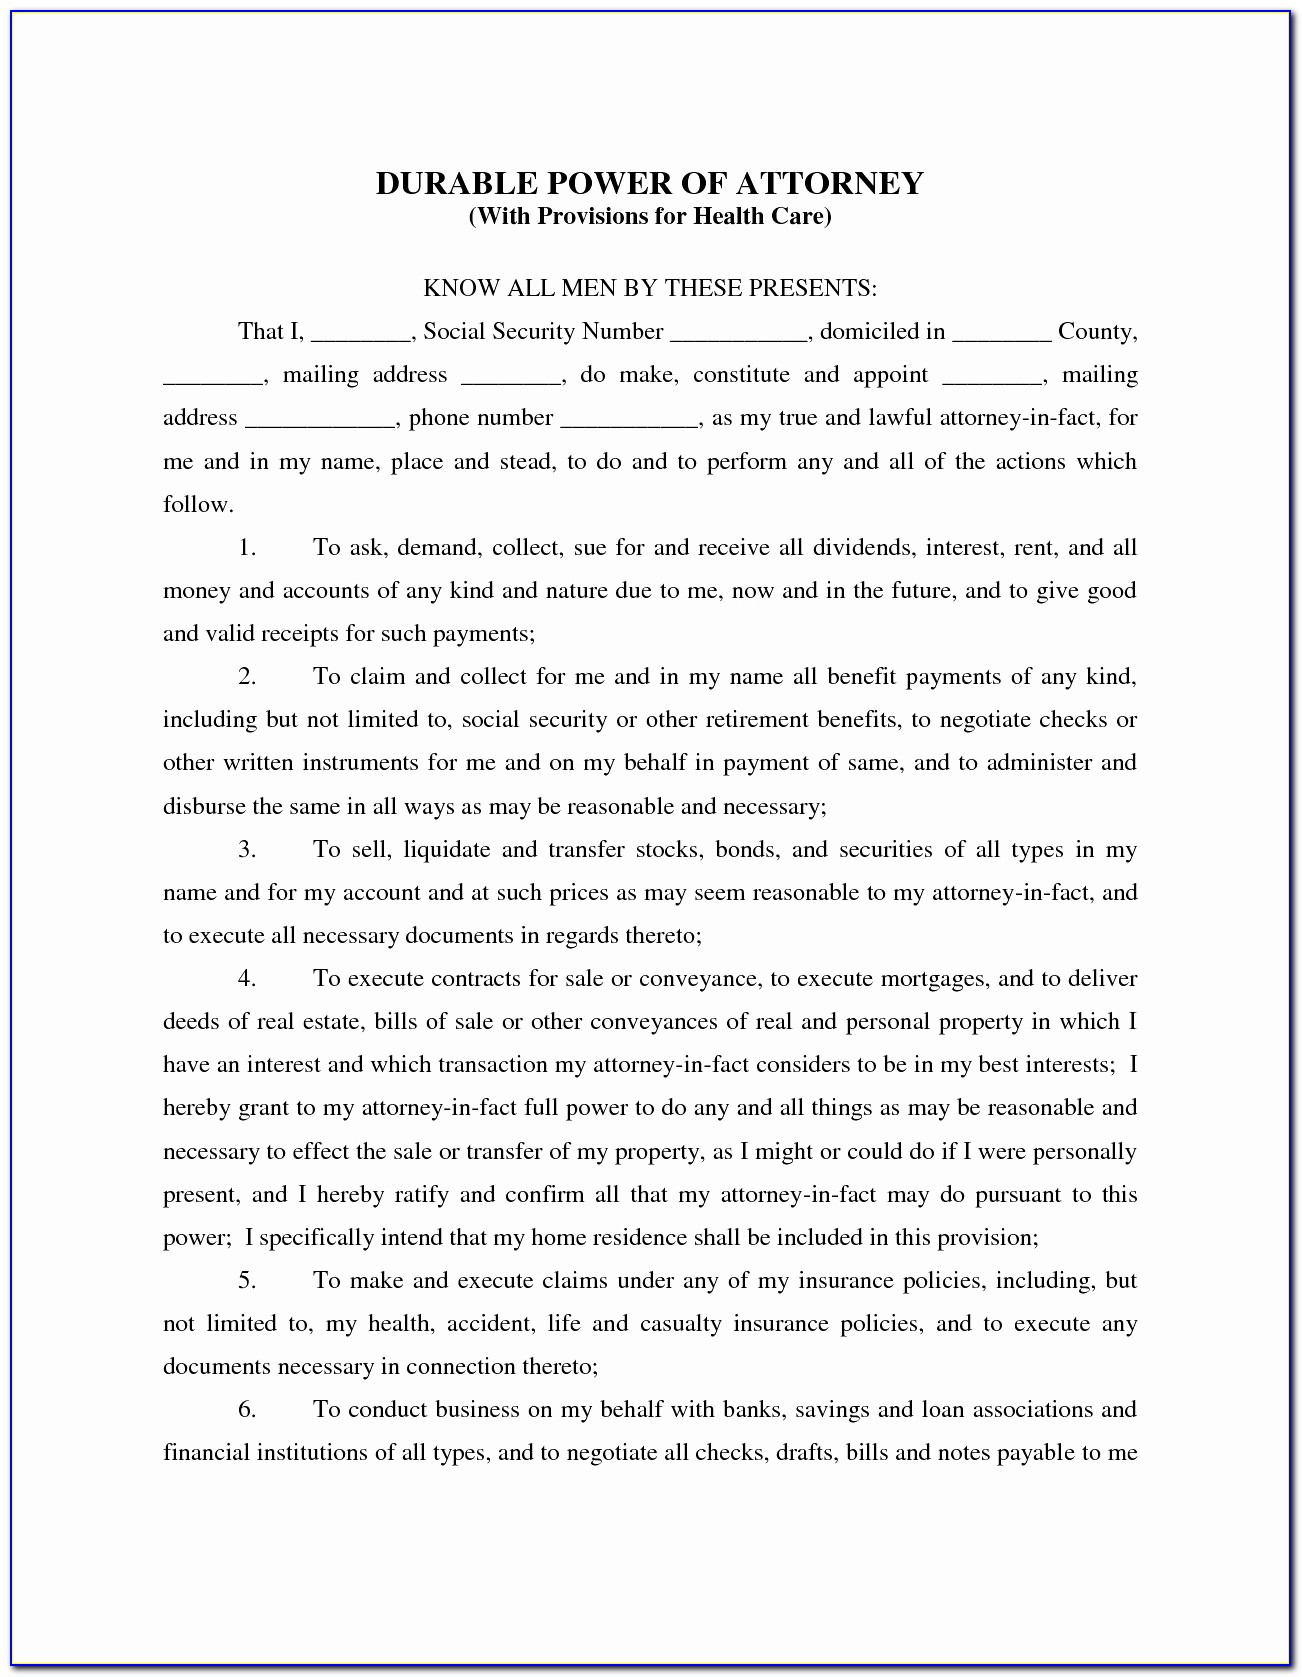 Missouri Durable Power Of Attorney Form New 50 Beautiful Missouri Durable Power Attorney Form Documents